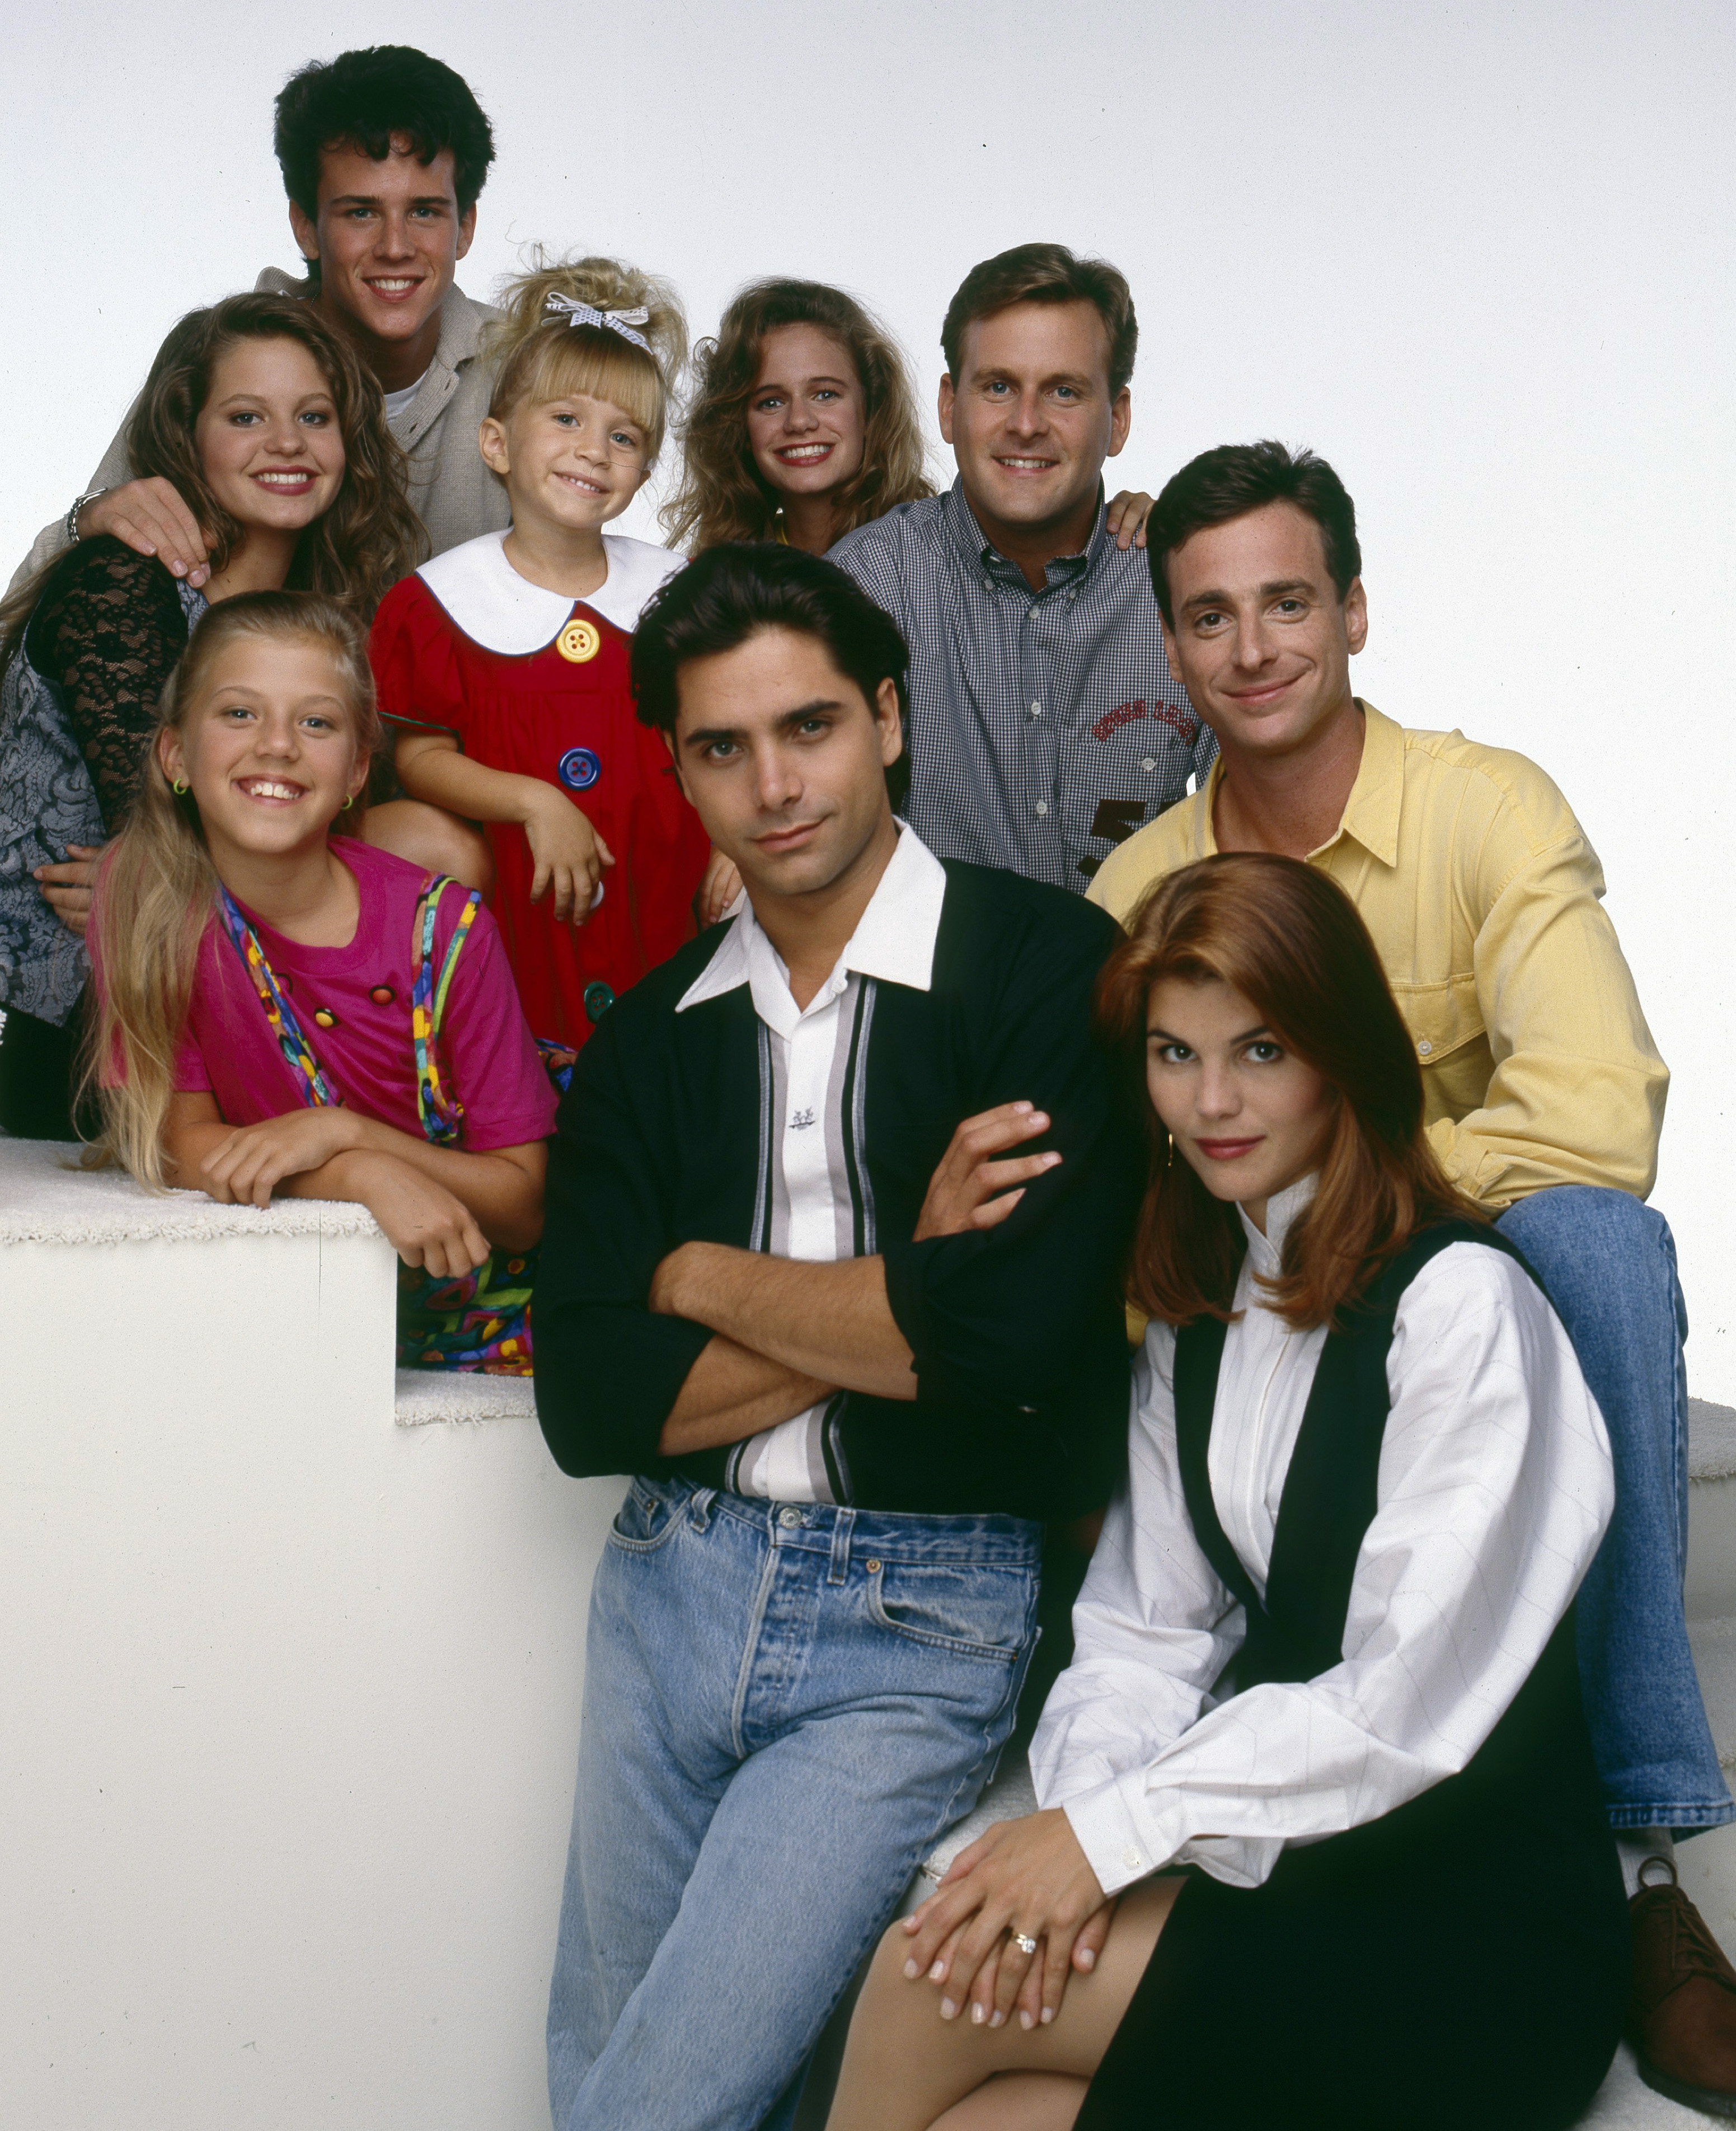 (Not in order) Jodie Sweetin, Mary-Kate / Ashley Olsen, Bob Saget, Candace Cameron Burke, Dave Coulier, John Stamos, Lori Loughlin, Scott Weinger, and Andrea Barber pose for a promotional photo for "Full House" on August 30, 1993 | Source: Getty Images